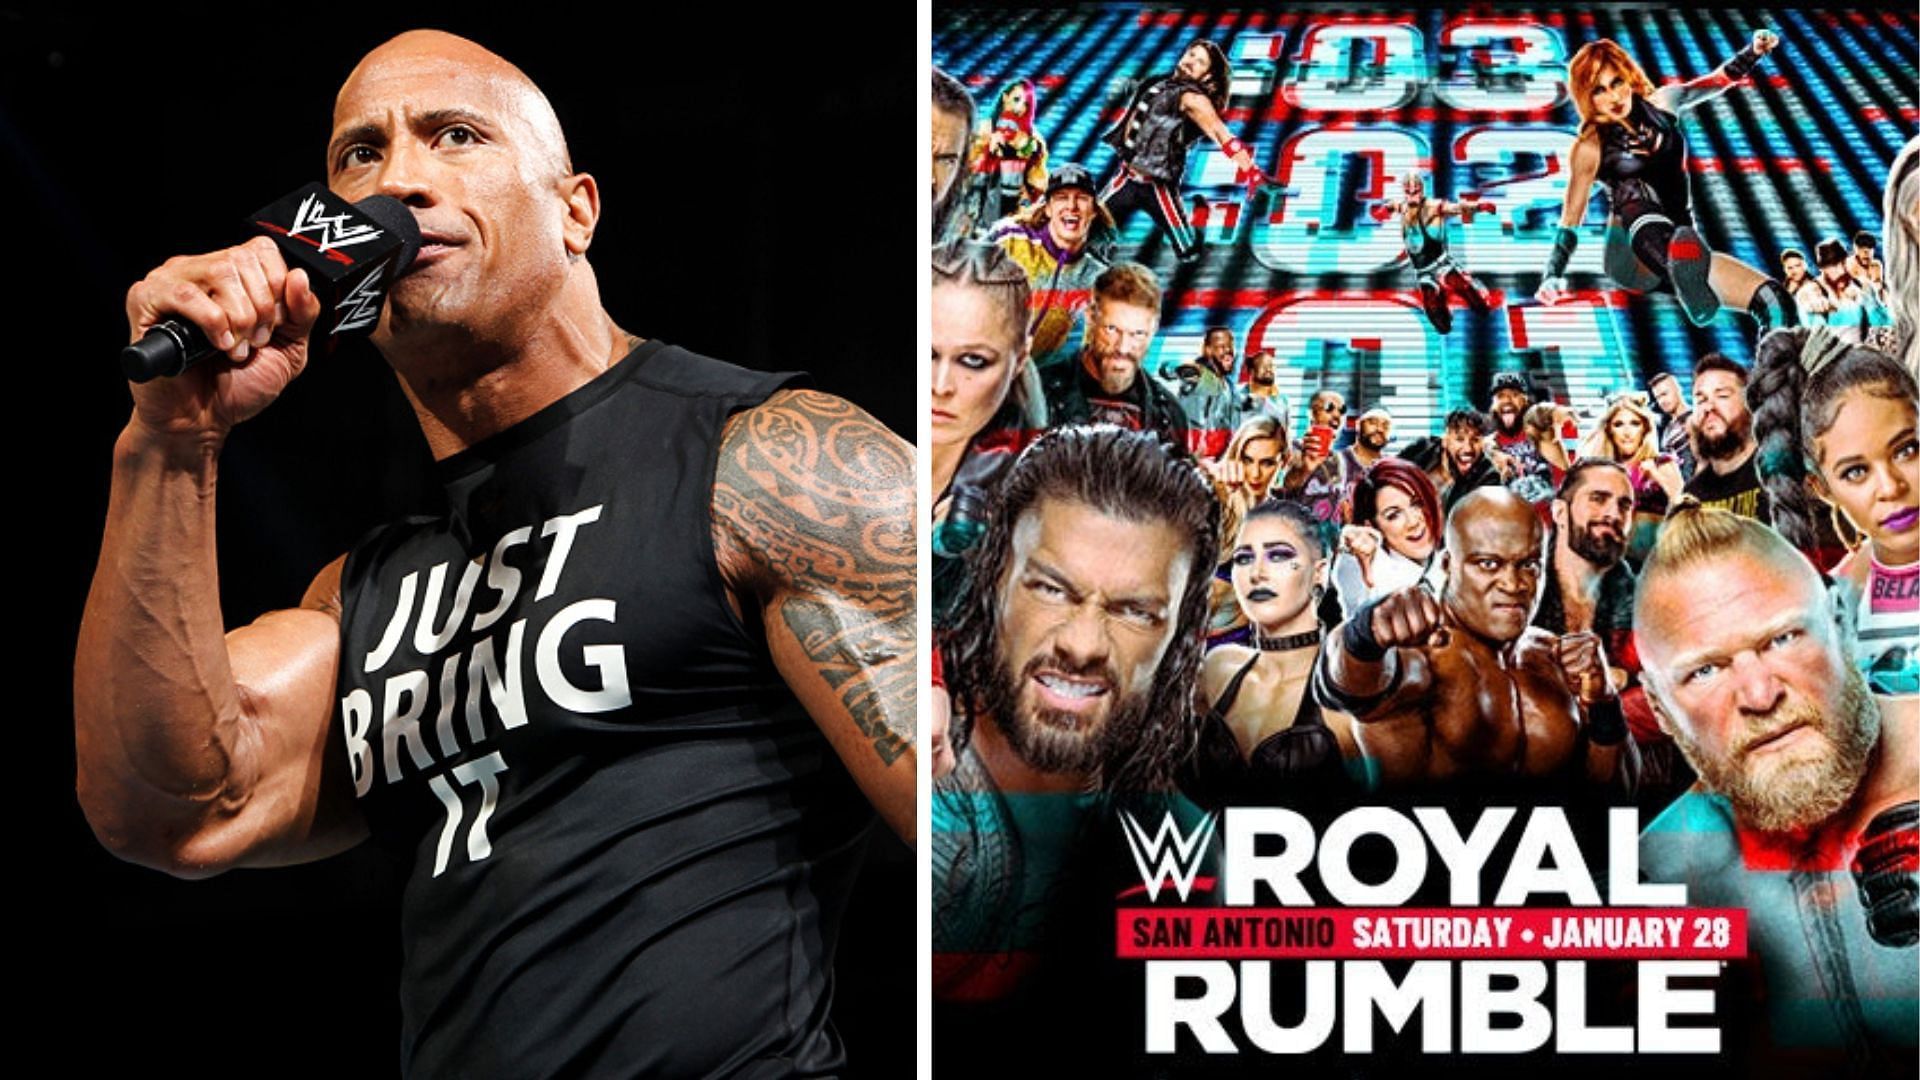 The Rock has been rumored to face Roman Reigns at WWE WrestleMania 39